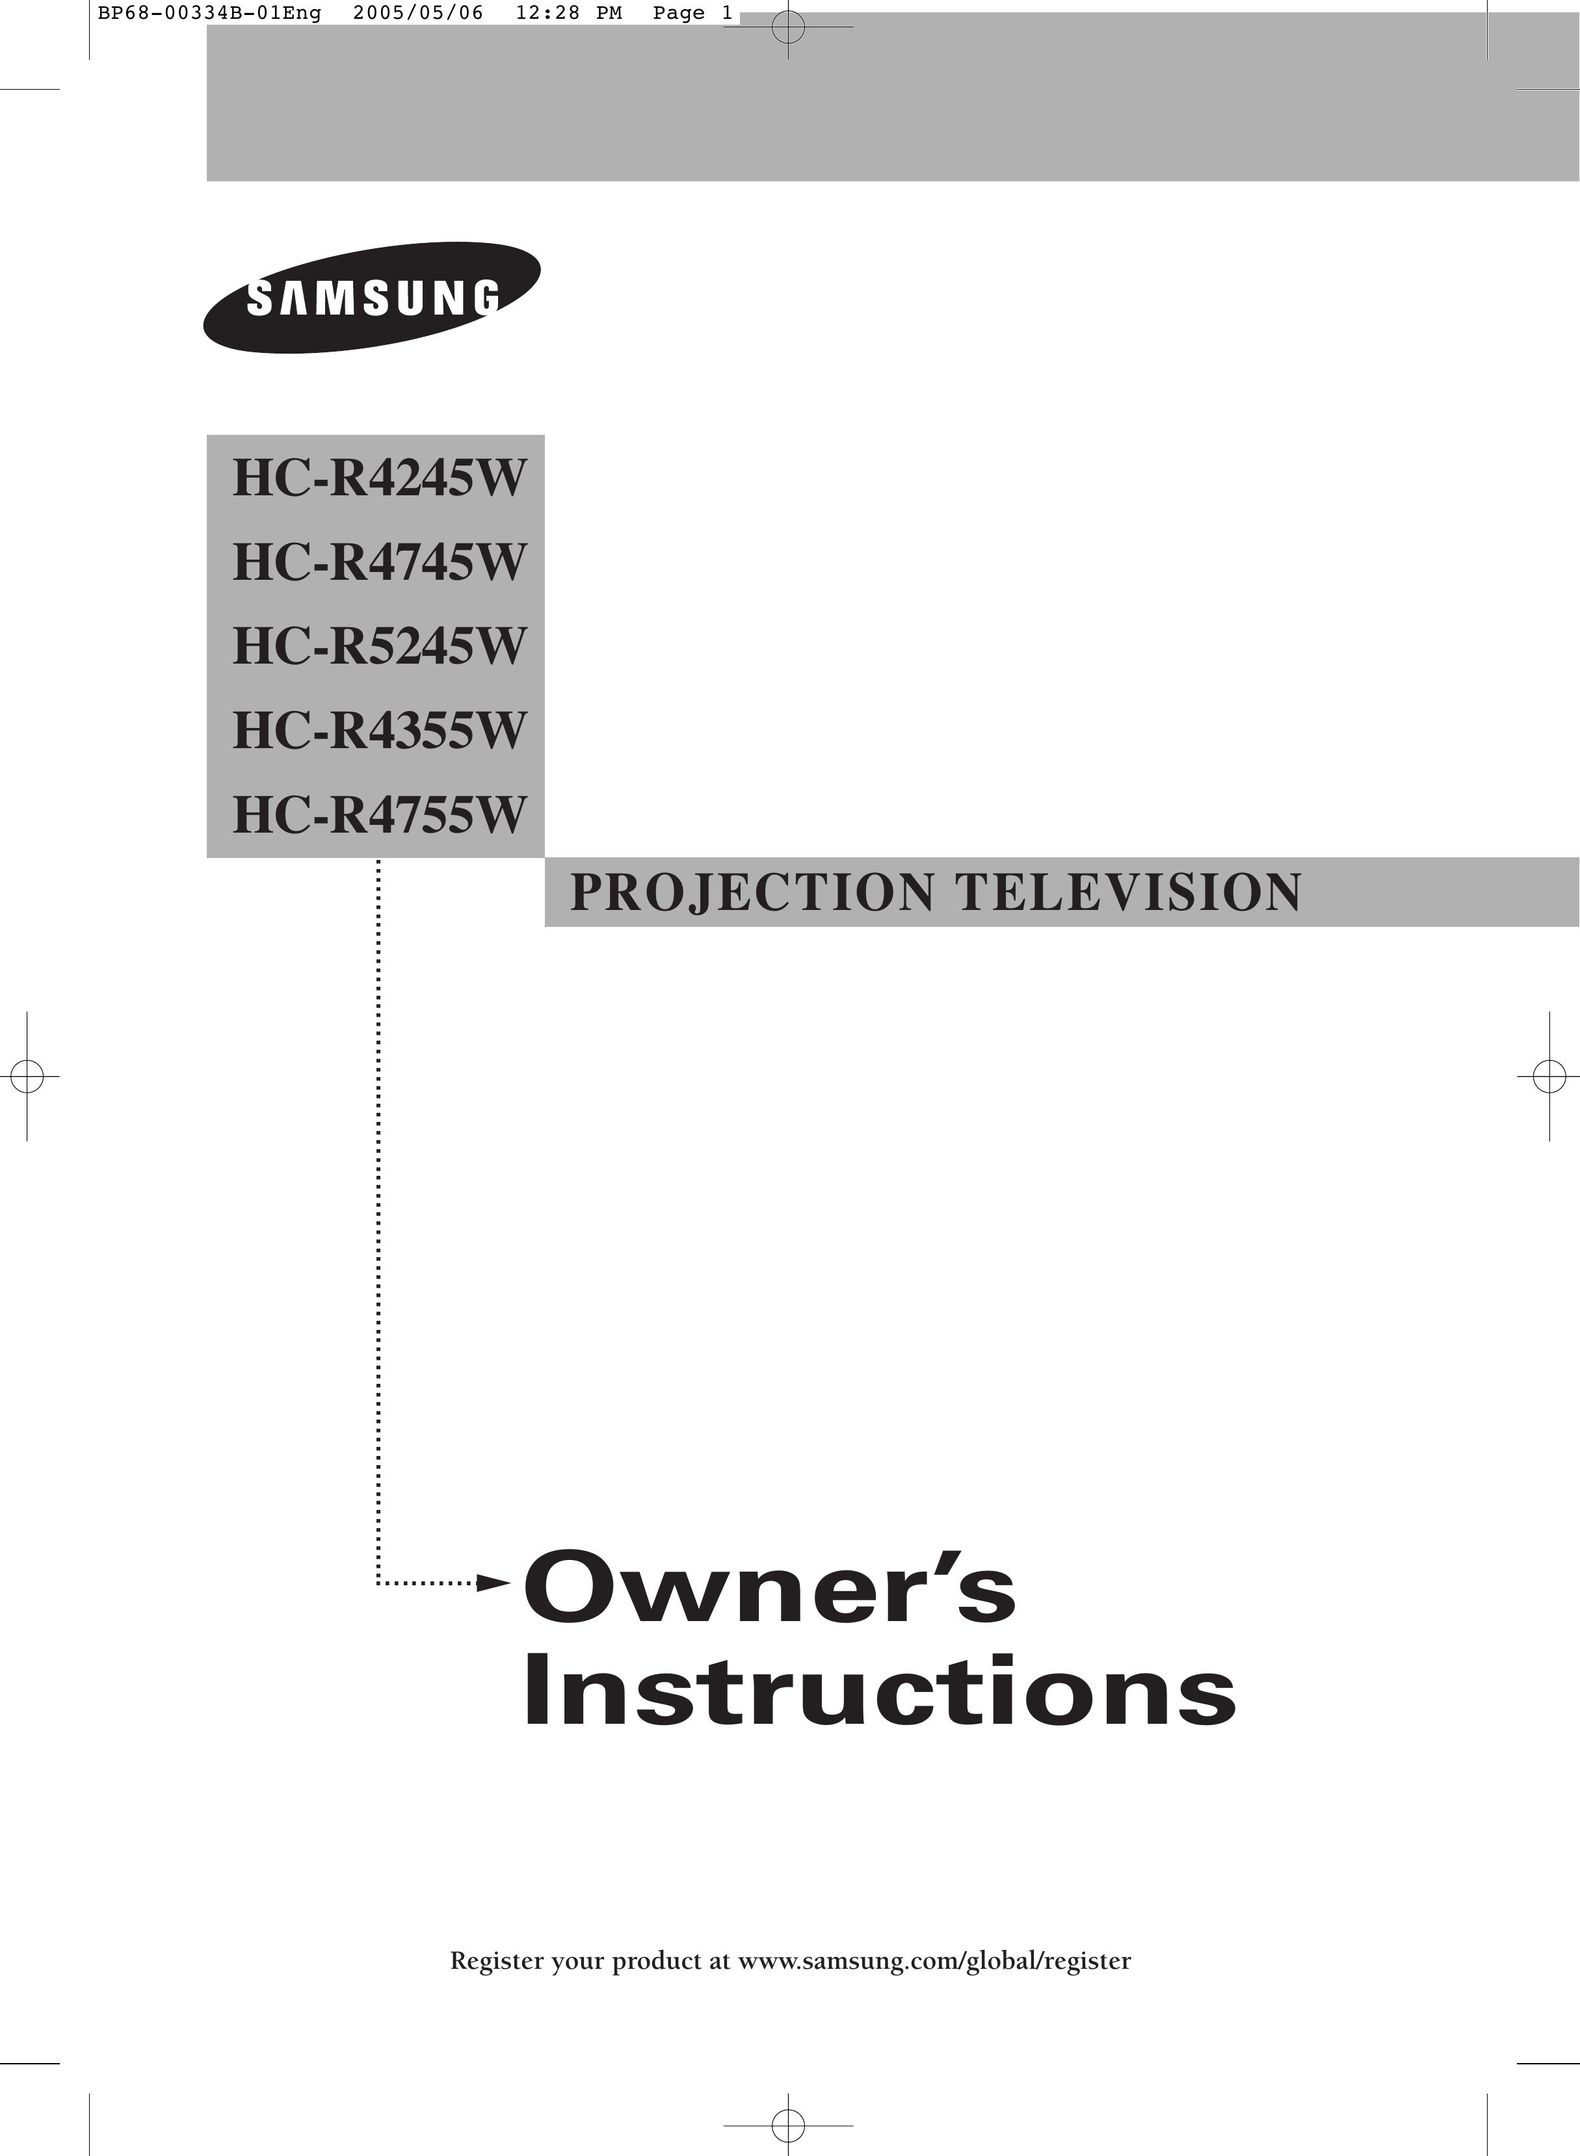 Samsung HC-R4745W Projection Television User Manual